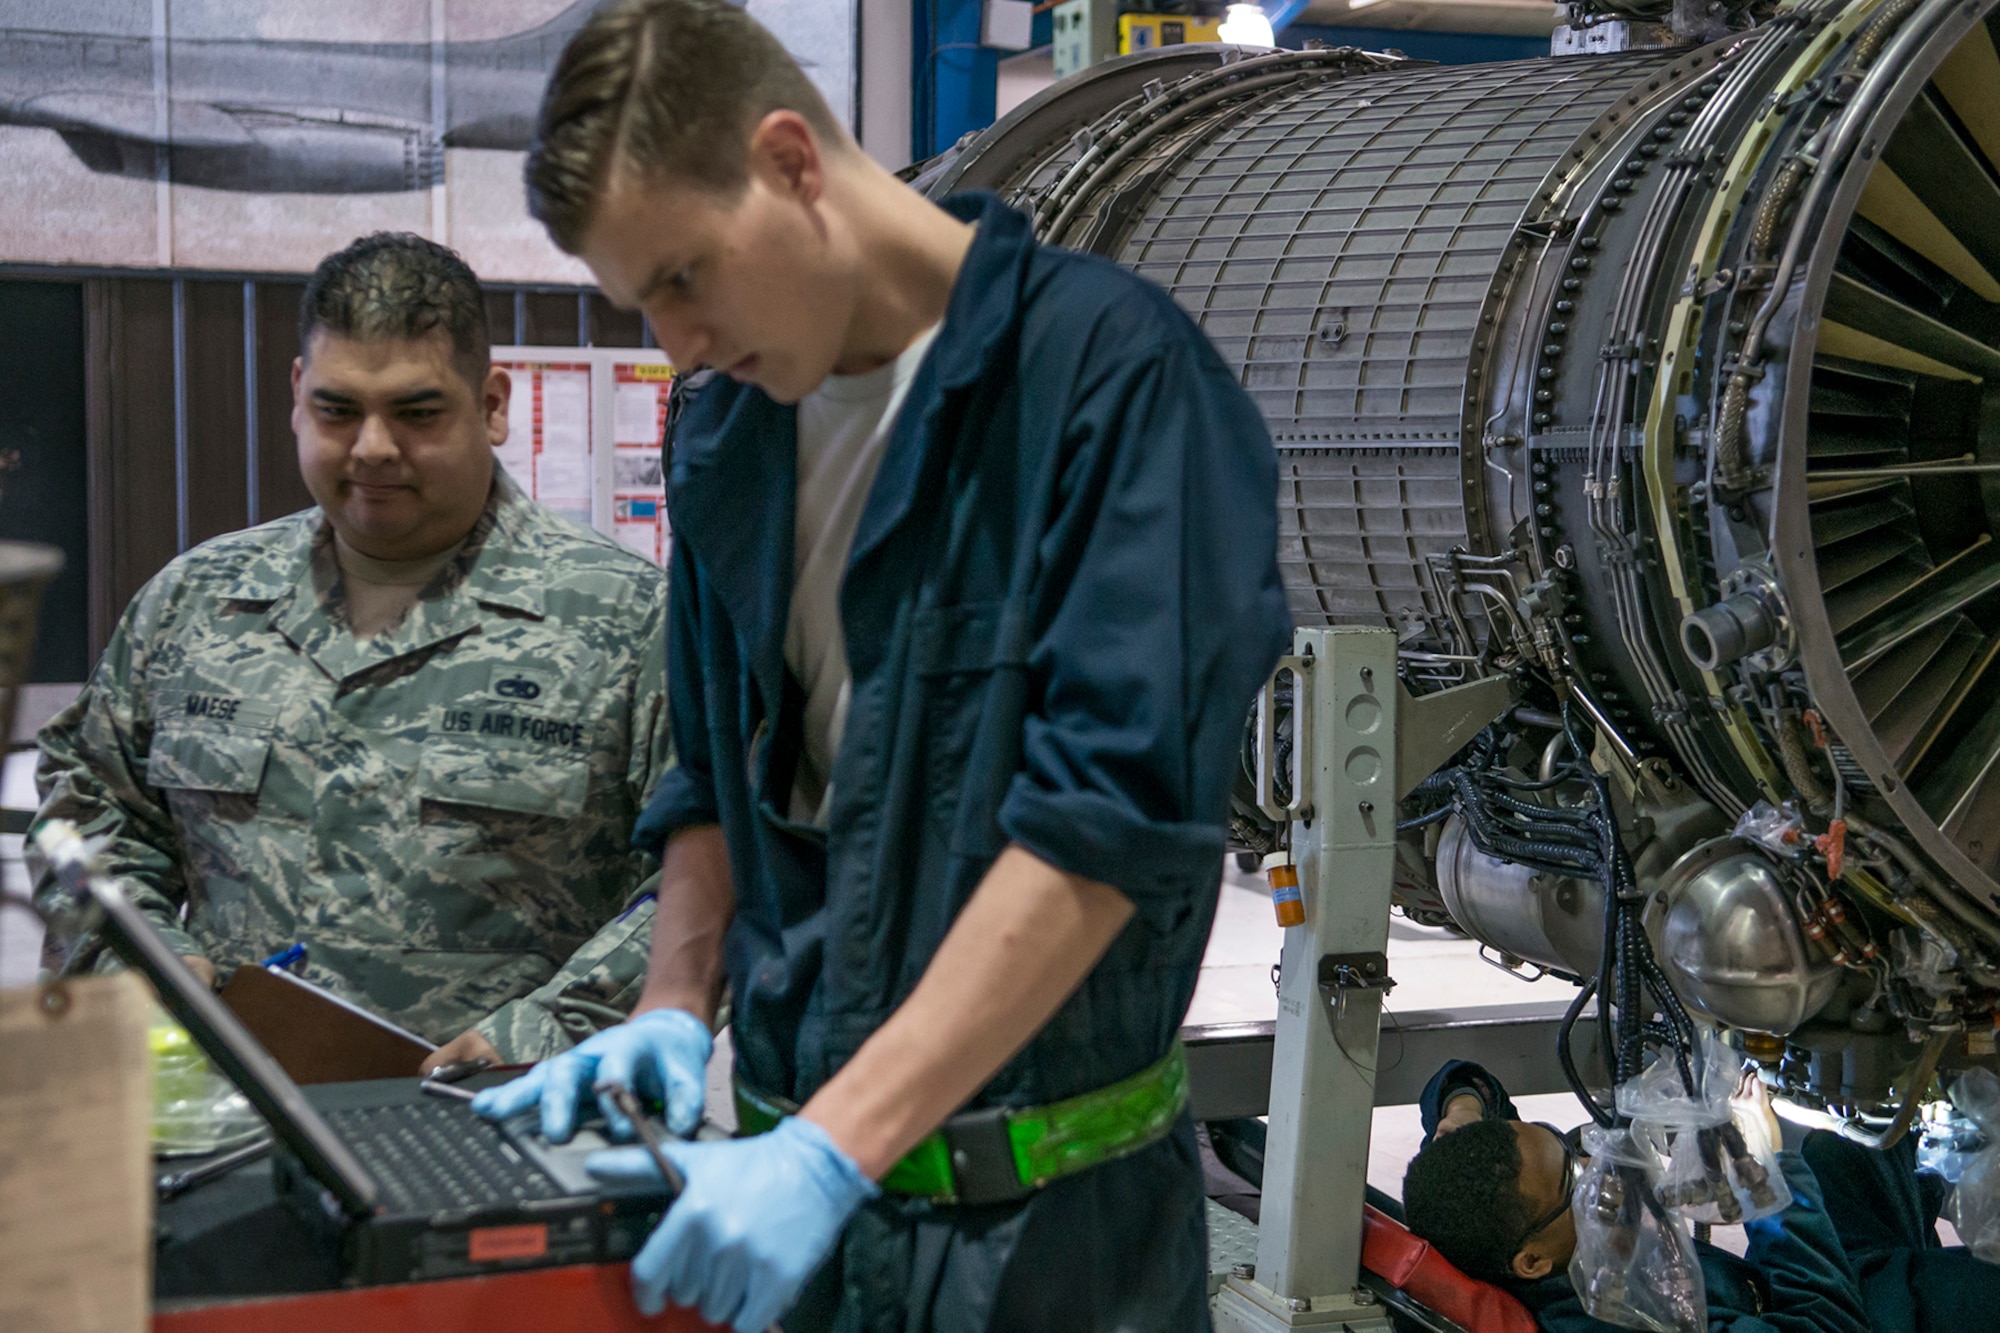 U.S. Air Force Tech. Sgt. Jeffrey Maese, 489th Maintenance Squadron (MXS) propulsion shop production superintendent, looks on as Senior Airman Matthew Waliszewski reads jet engine technical orders on Feb. 22, 2016, Dyess Air Force Base (AFB), Texas. The 489th MXS is assigned to the Air Force Reserve Command’s 489th Bomb Group at Dyess, which assigned to the 307th Bomb Wing at Barksdale Air Force Base, La. (U.S. Air Force photo by Master Sgt. Greg Steele/Released)